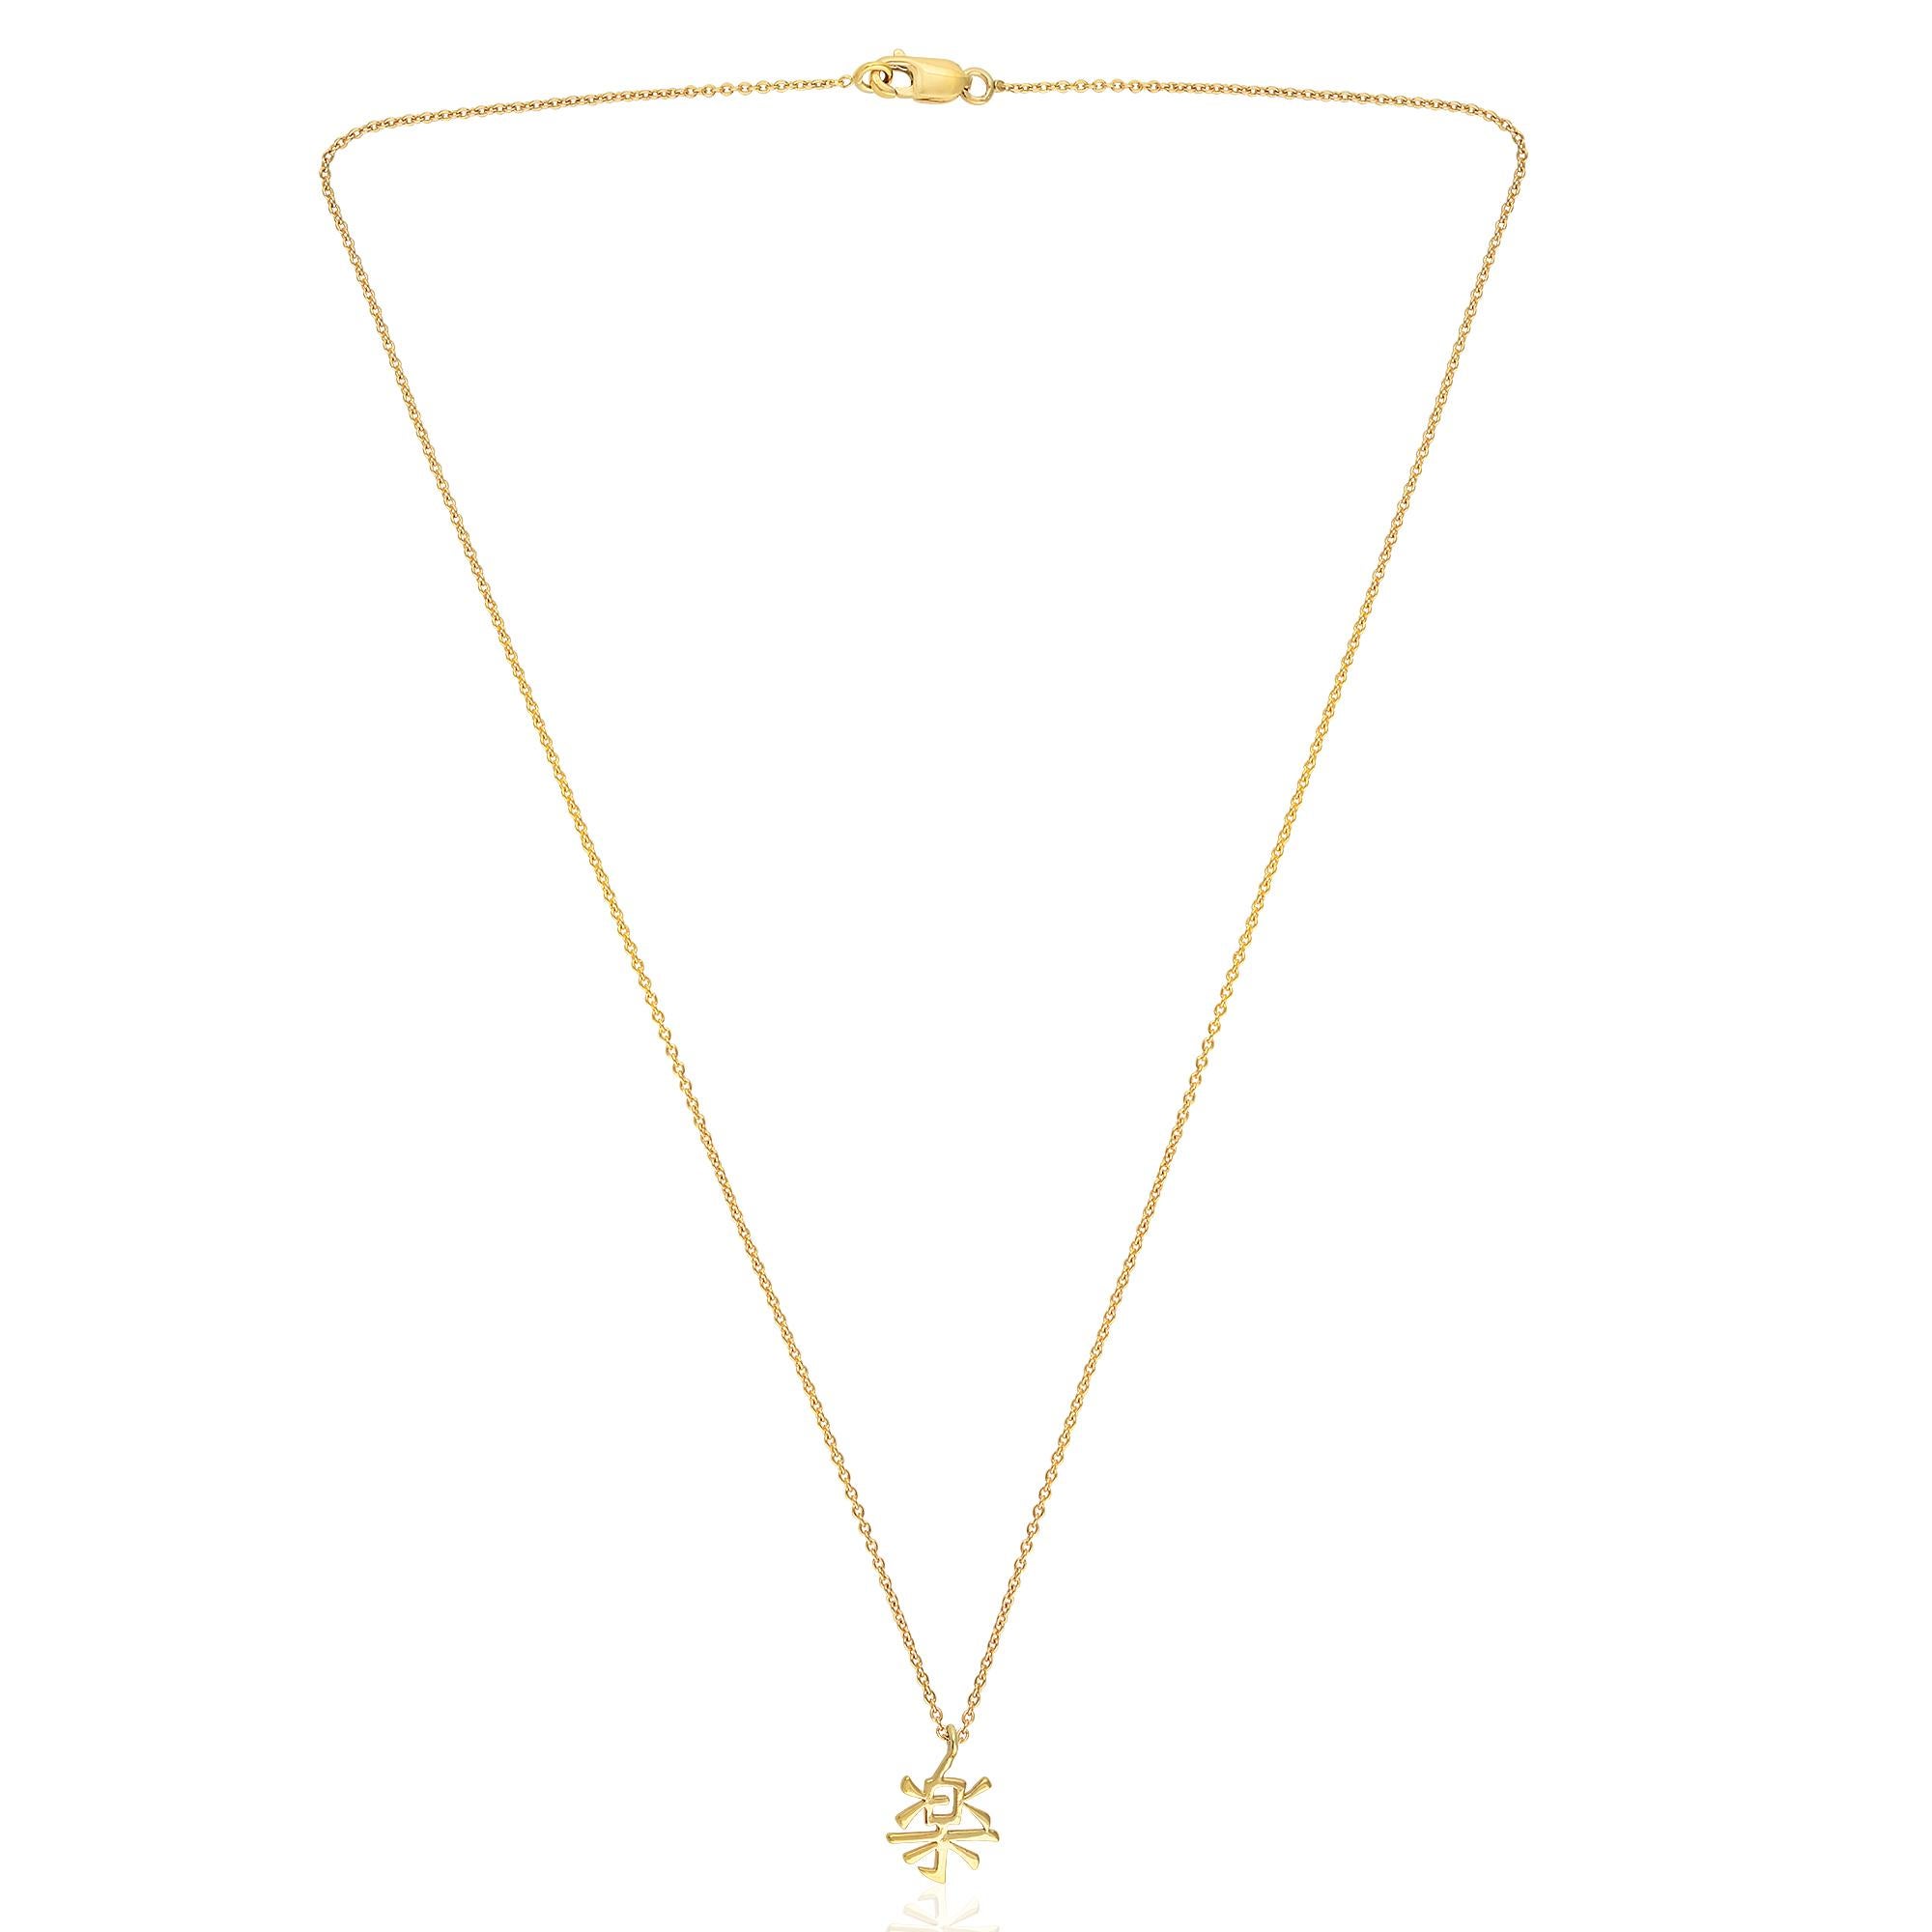 Experience the beauty and serenity of this extraordinary necklace, and let its exquisite Kanji symbol and exquisite craftsmanship serve as a daily reminder to find comfort and embrace the peaceful moments that bring joy and contentment into our